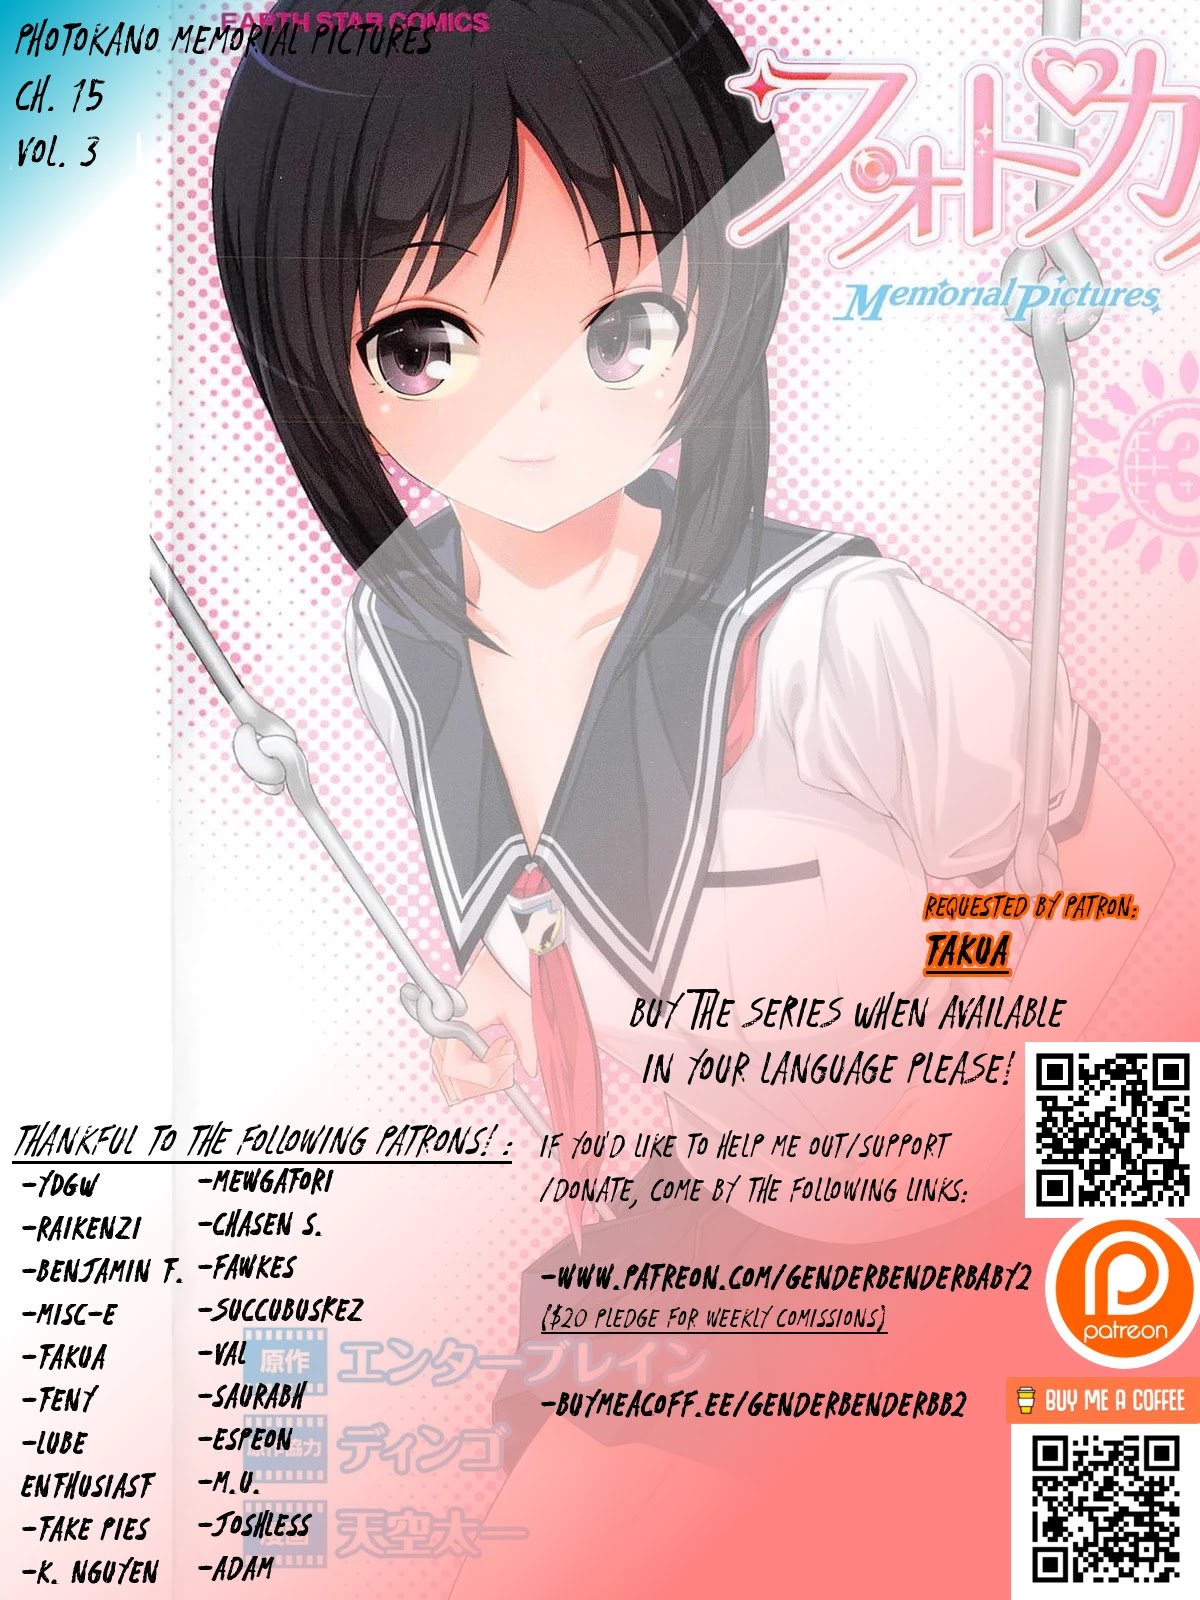 Photo Kano - Memorial Pictures Chapter 15 #2